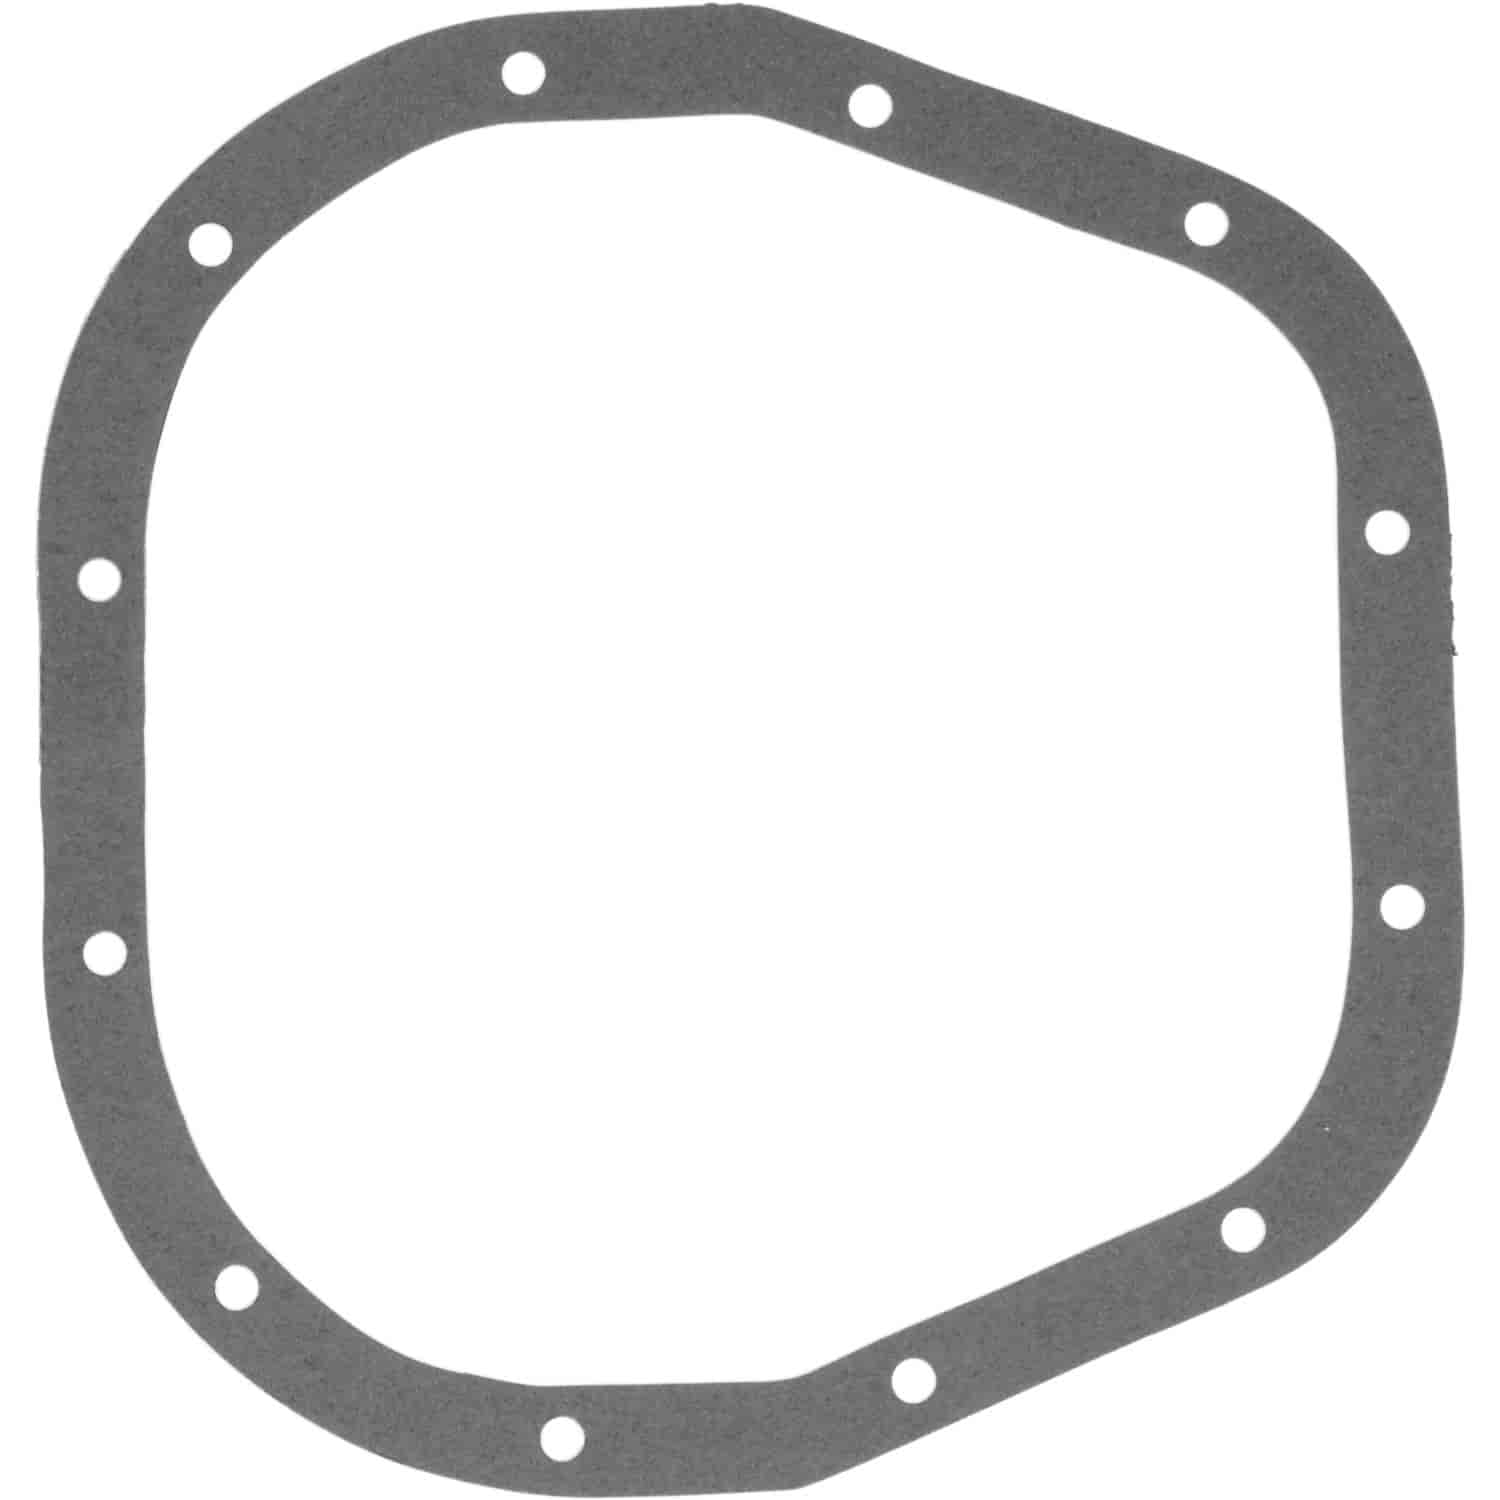 Differential Cover Gasket Ford 12-Bolt Truck